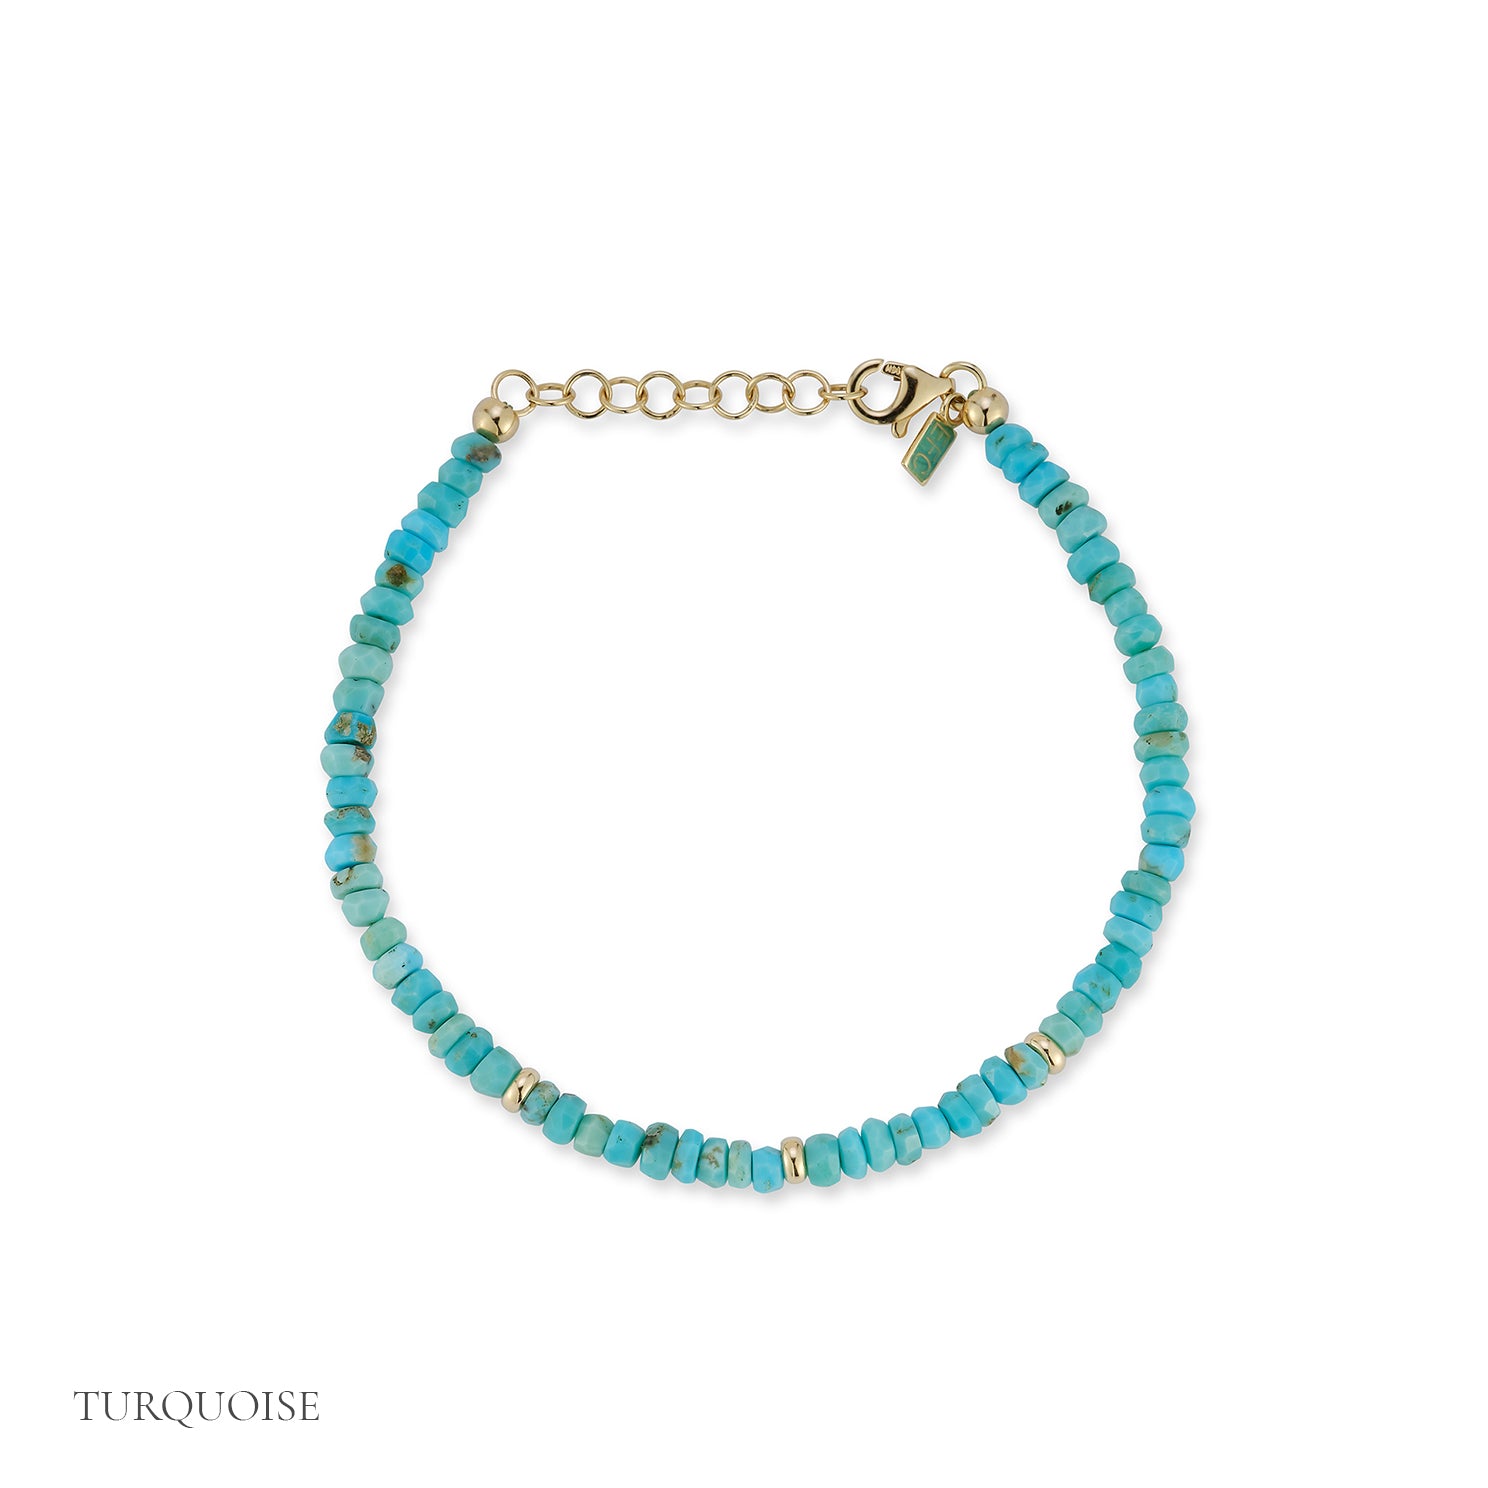 Birthstone Bead Bracelet In Turquoise with 14k yellow gold chain - December Option